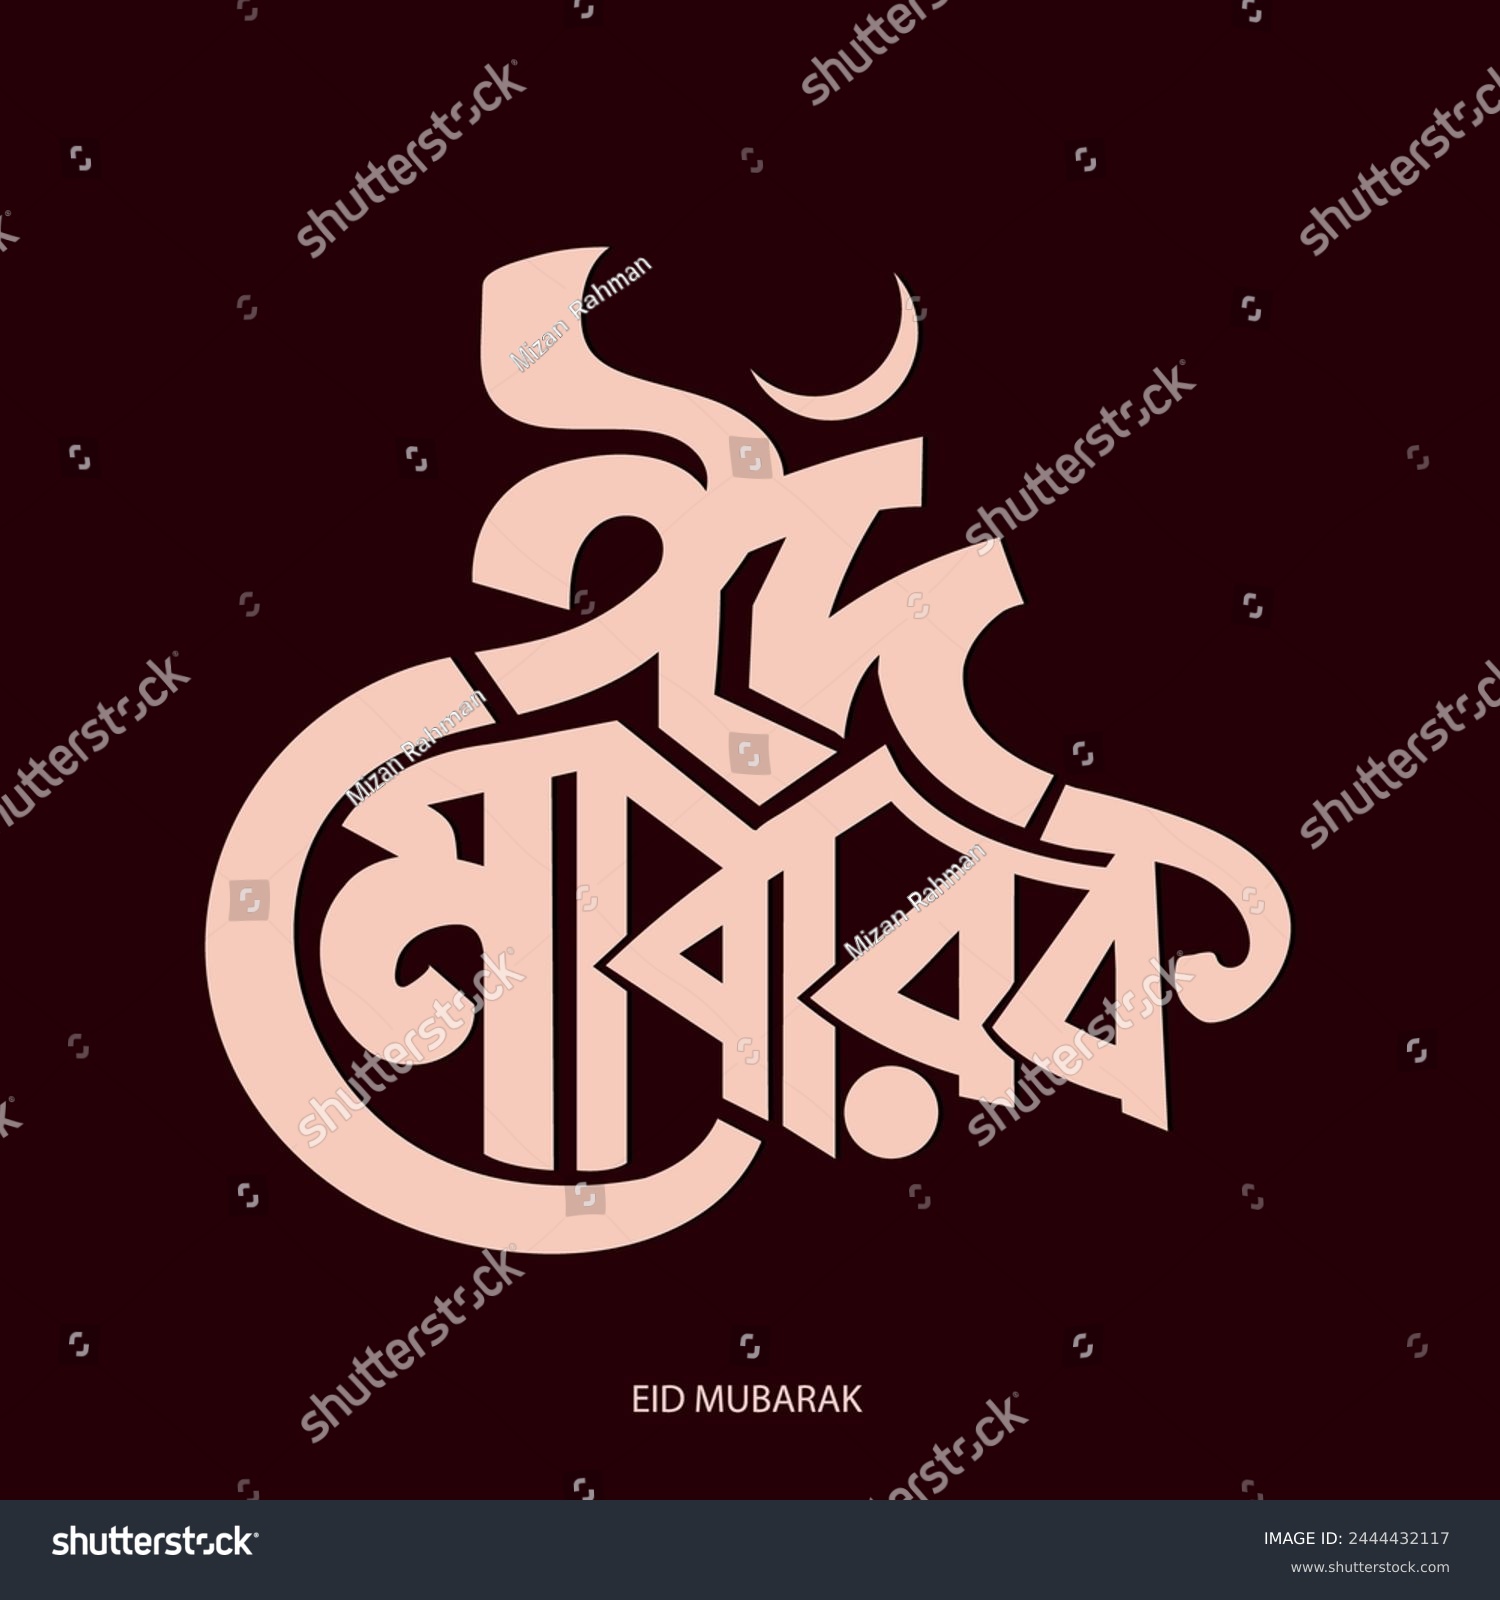 SVG of Eid Mubarak Bangla Typography and Calligraphy and mnemonic. Religious holiday celebrated by Muslims worldwide. Creative Idea, Concept Design for greeting Eid Mubarak  svg